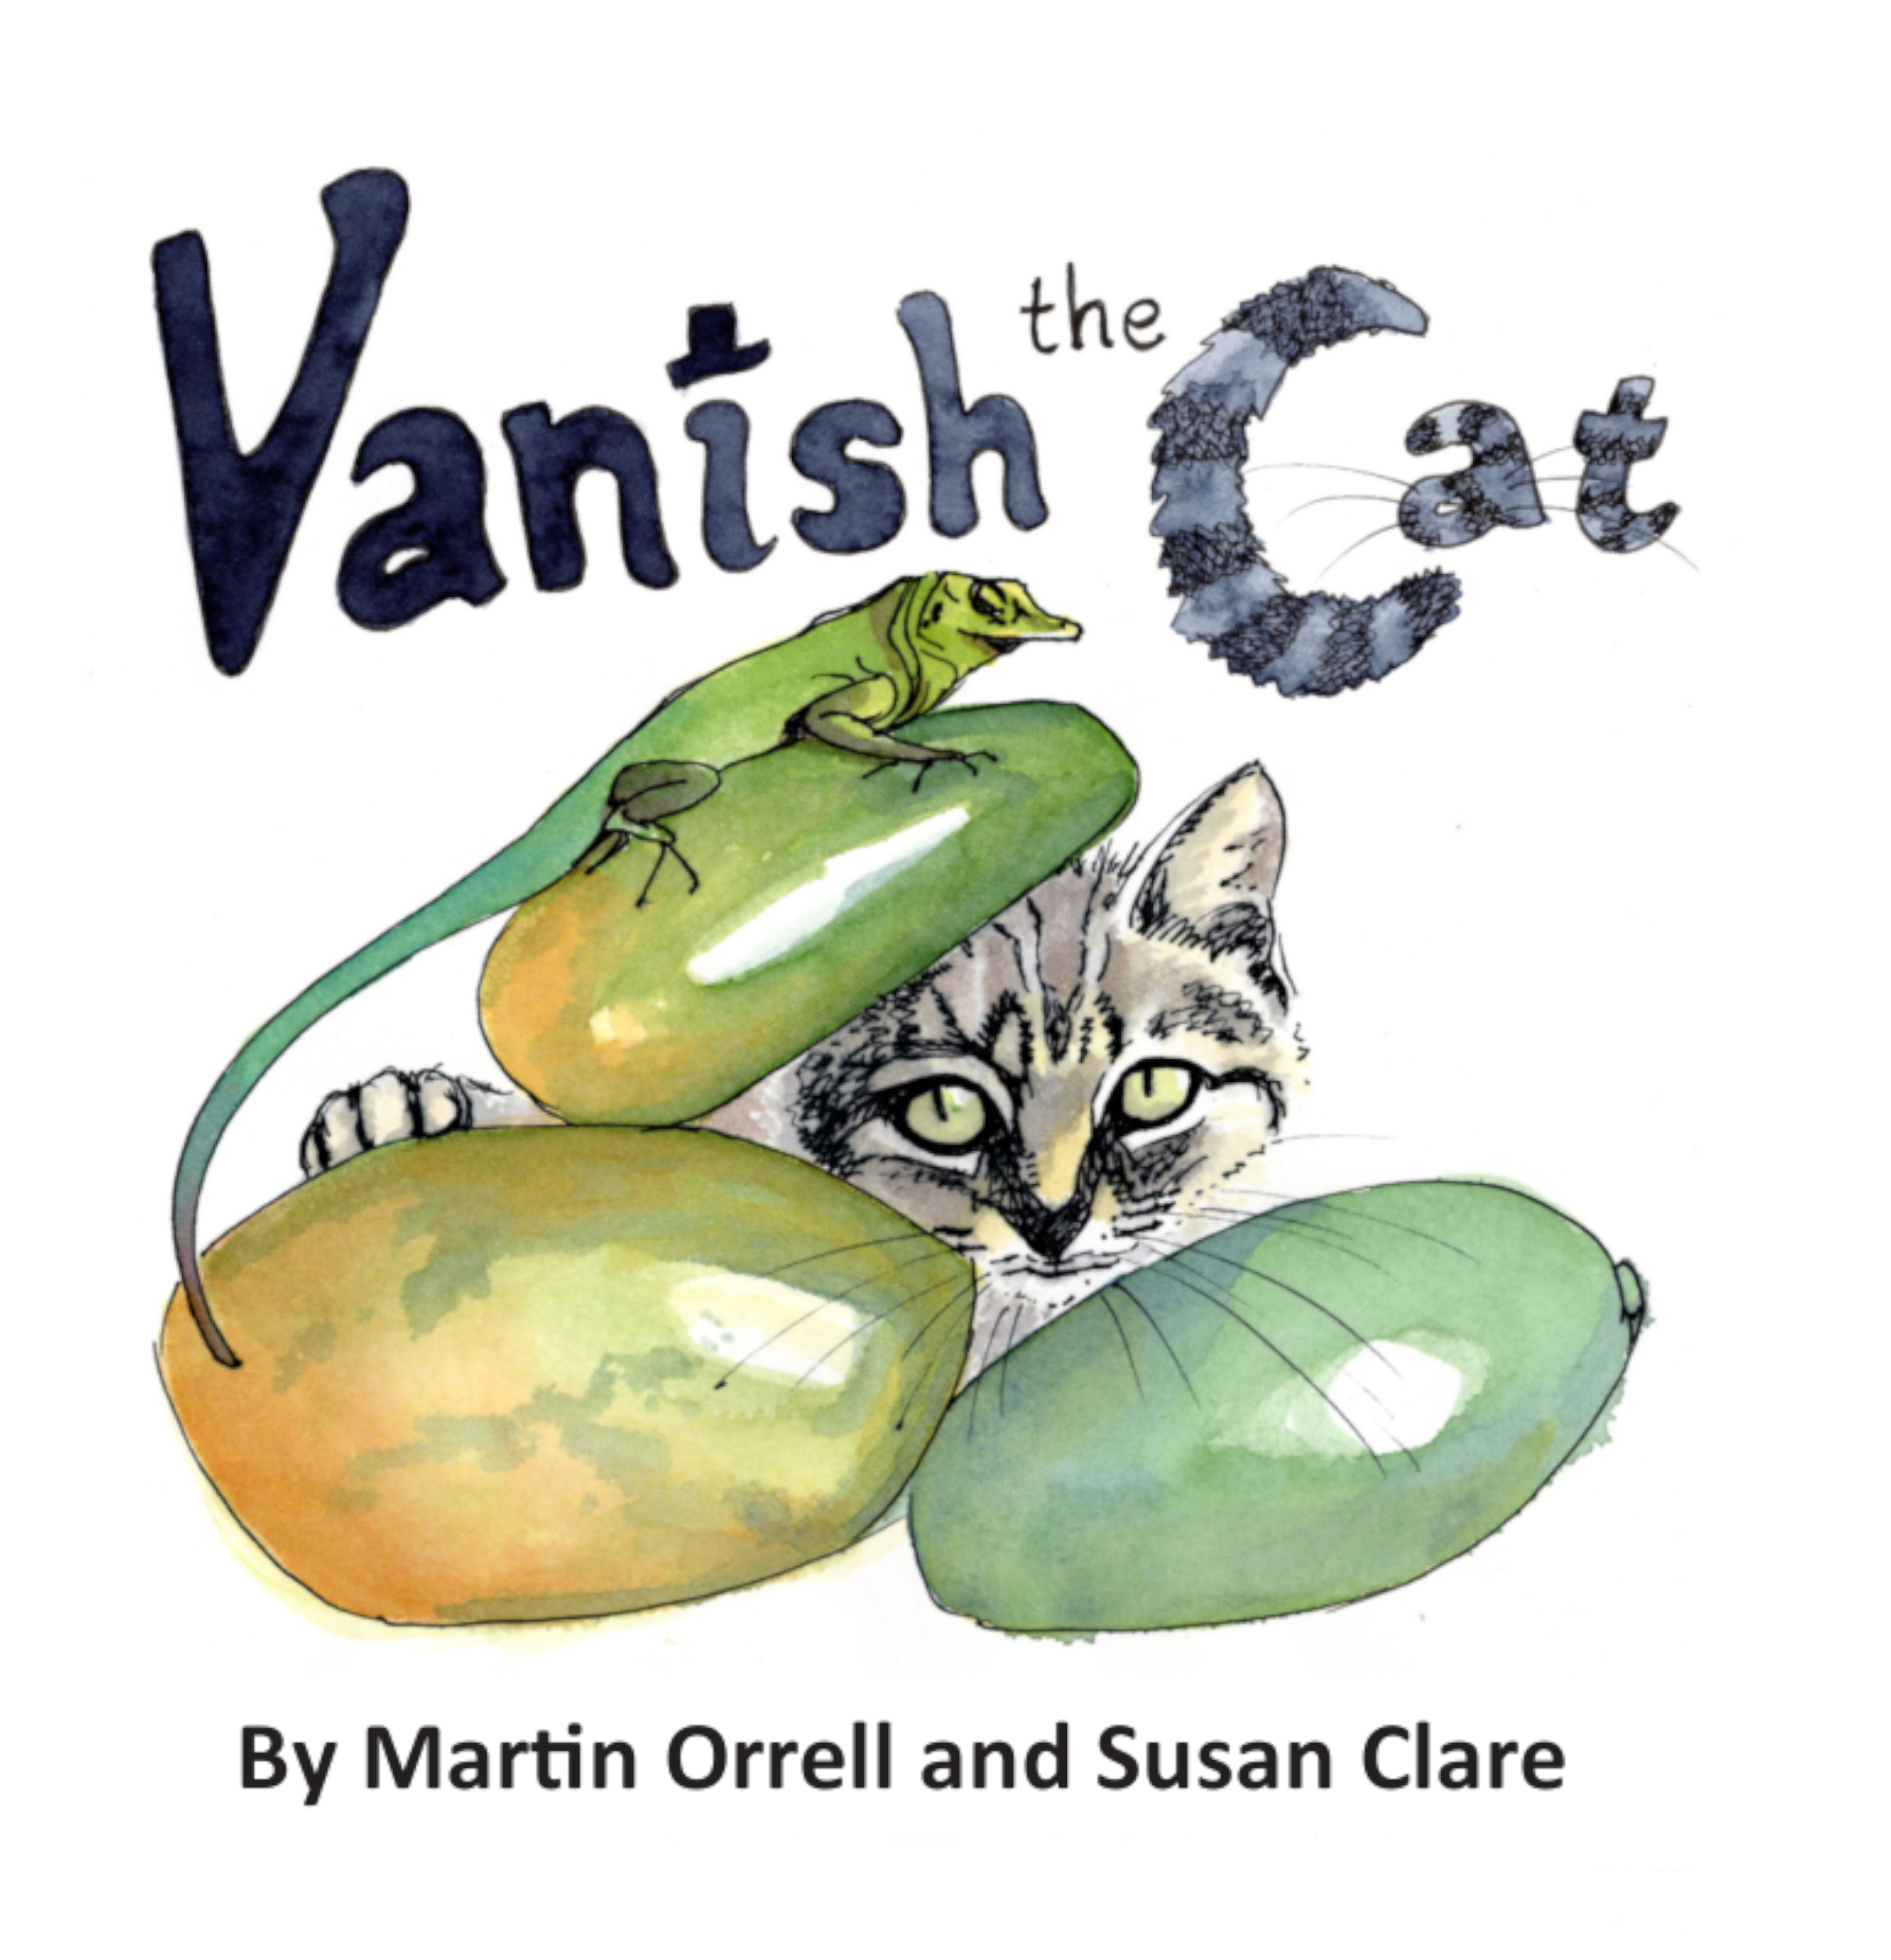 Vanish Front cover v6 scled to 205 mm 300dpi.png